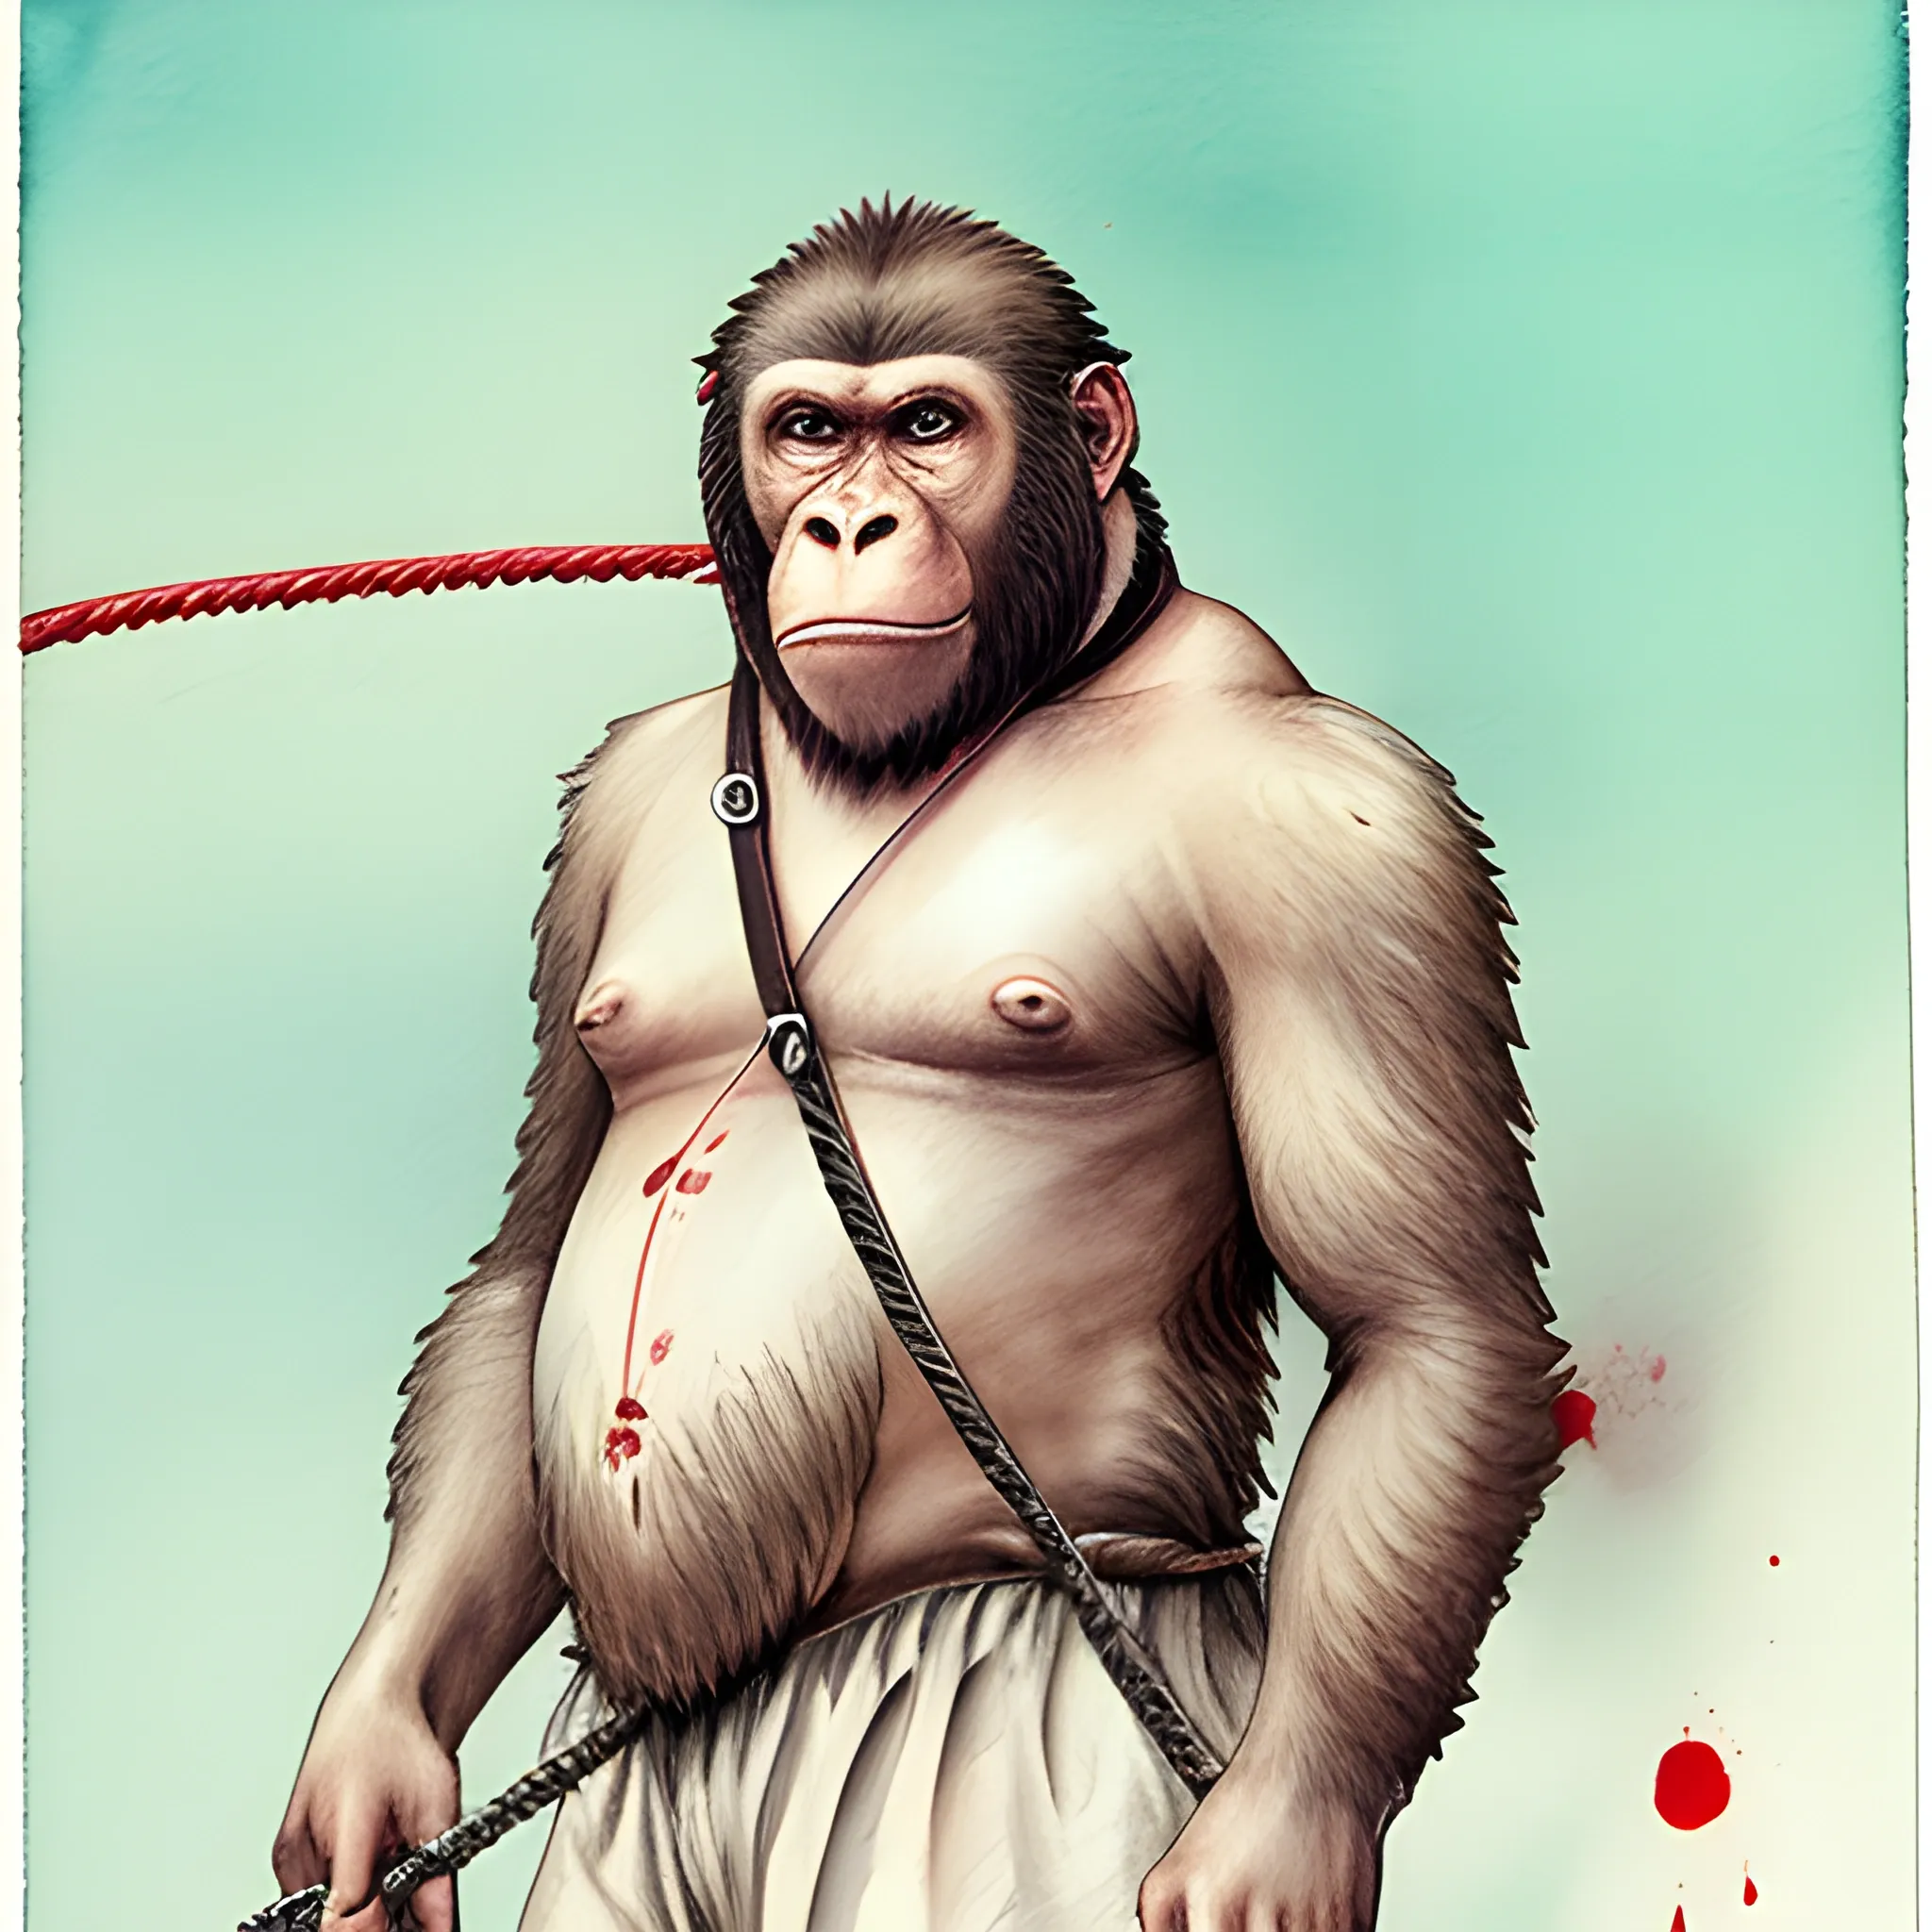 , Pencil Sketch, Water Color,  killer Ape cover with blood, french sailor with a leash, the leash tie to the neck of the ape, Goya Style, low saturation
